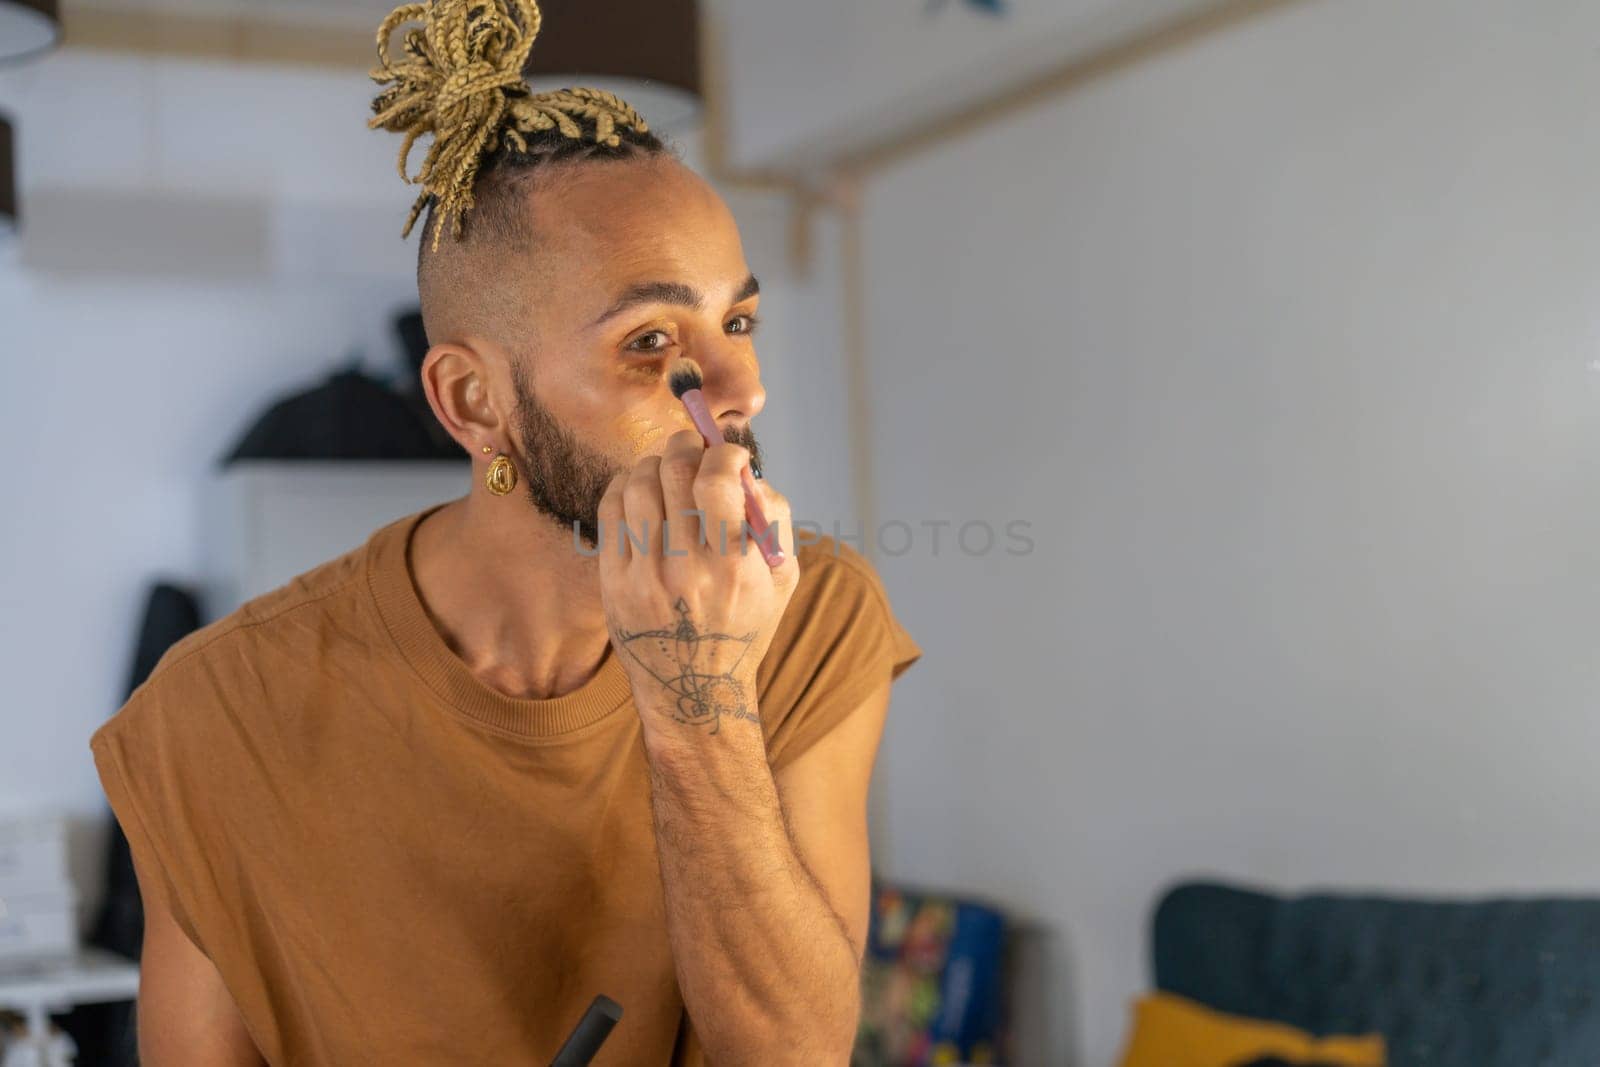 Black brazilian gay applying make up eyeshadow looking mirror view from behind. Non binary guy. LGBT People lifestyle fashion lgbtq concept